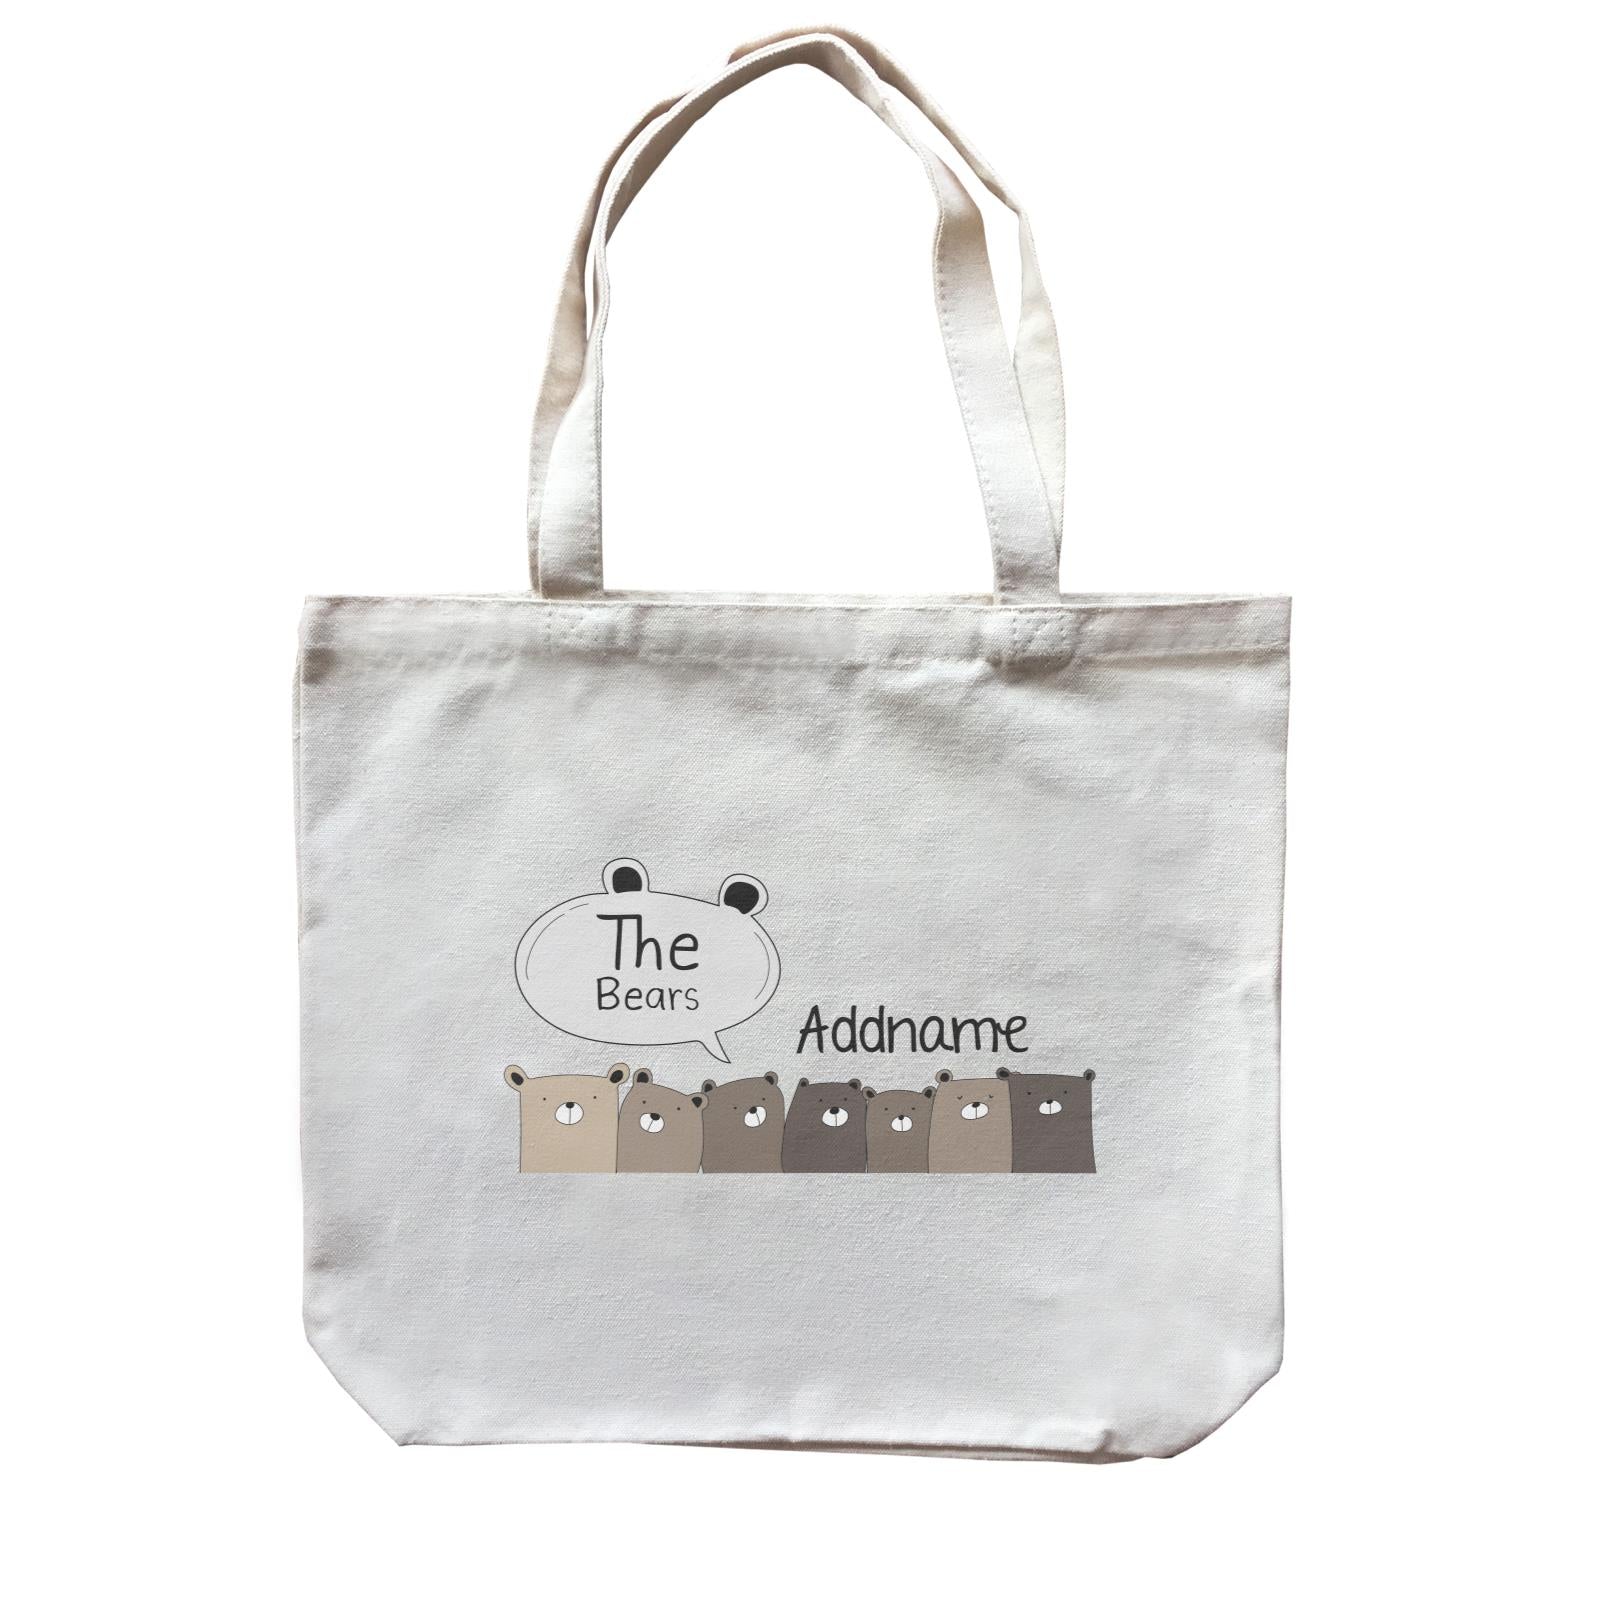 Cute Animals And Friends Series The Bears Group Addname Canvas Bag